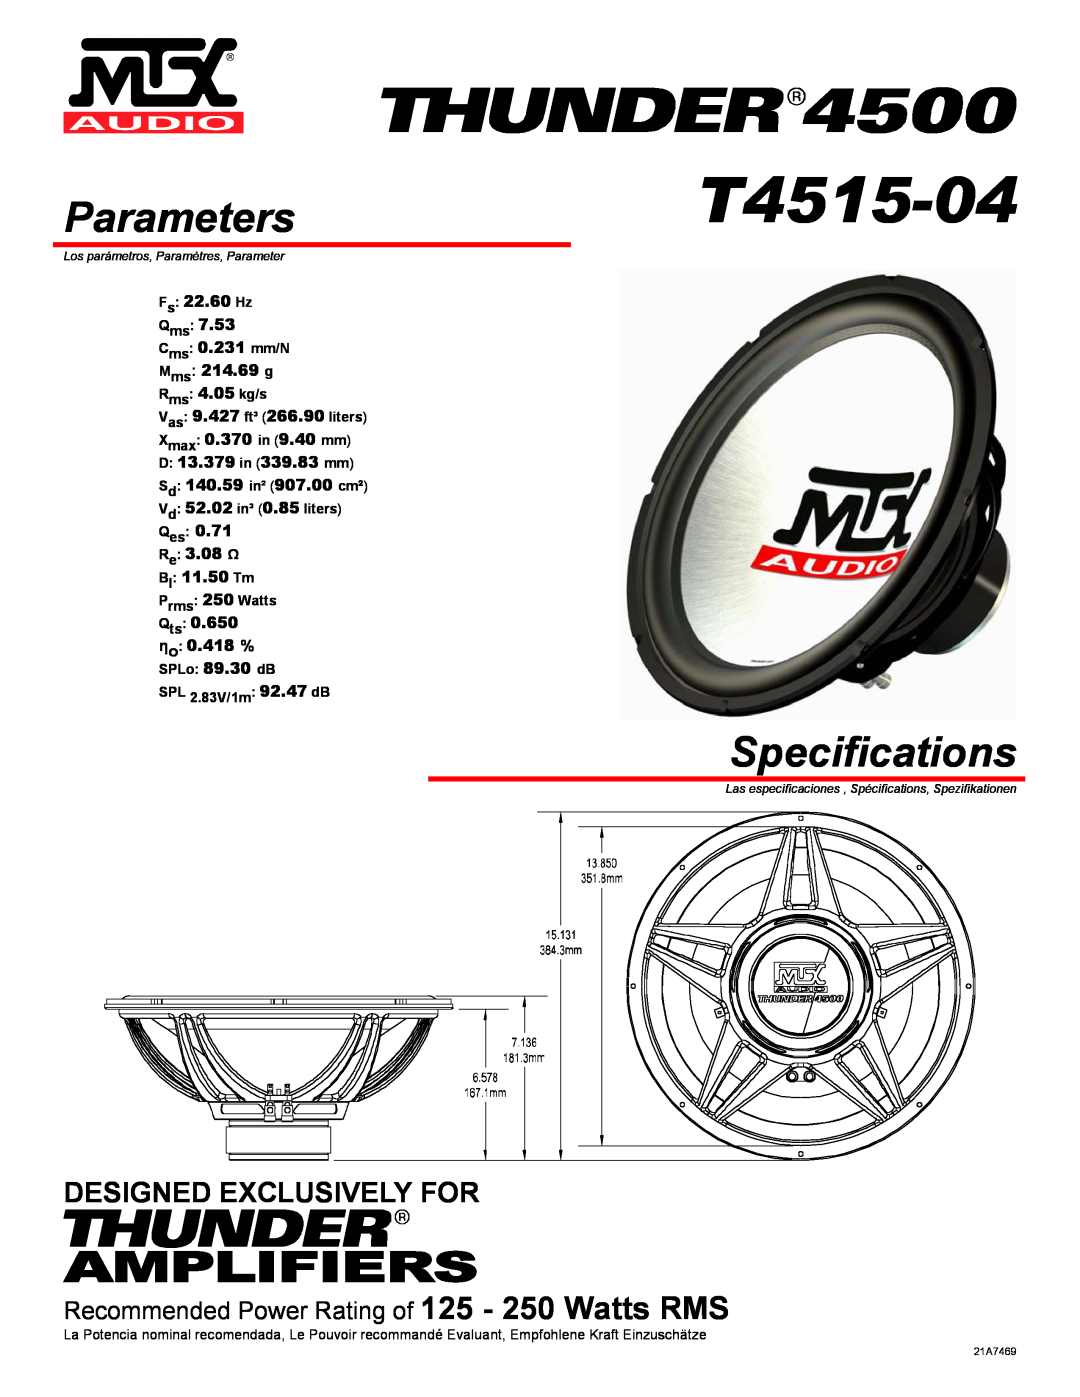 MTX Audio T4515-04 specifications Parameters, Specifications, Amplifiers, Designed Exclusively For, Fs 22.60 Hz Qms 